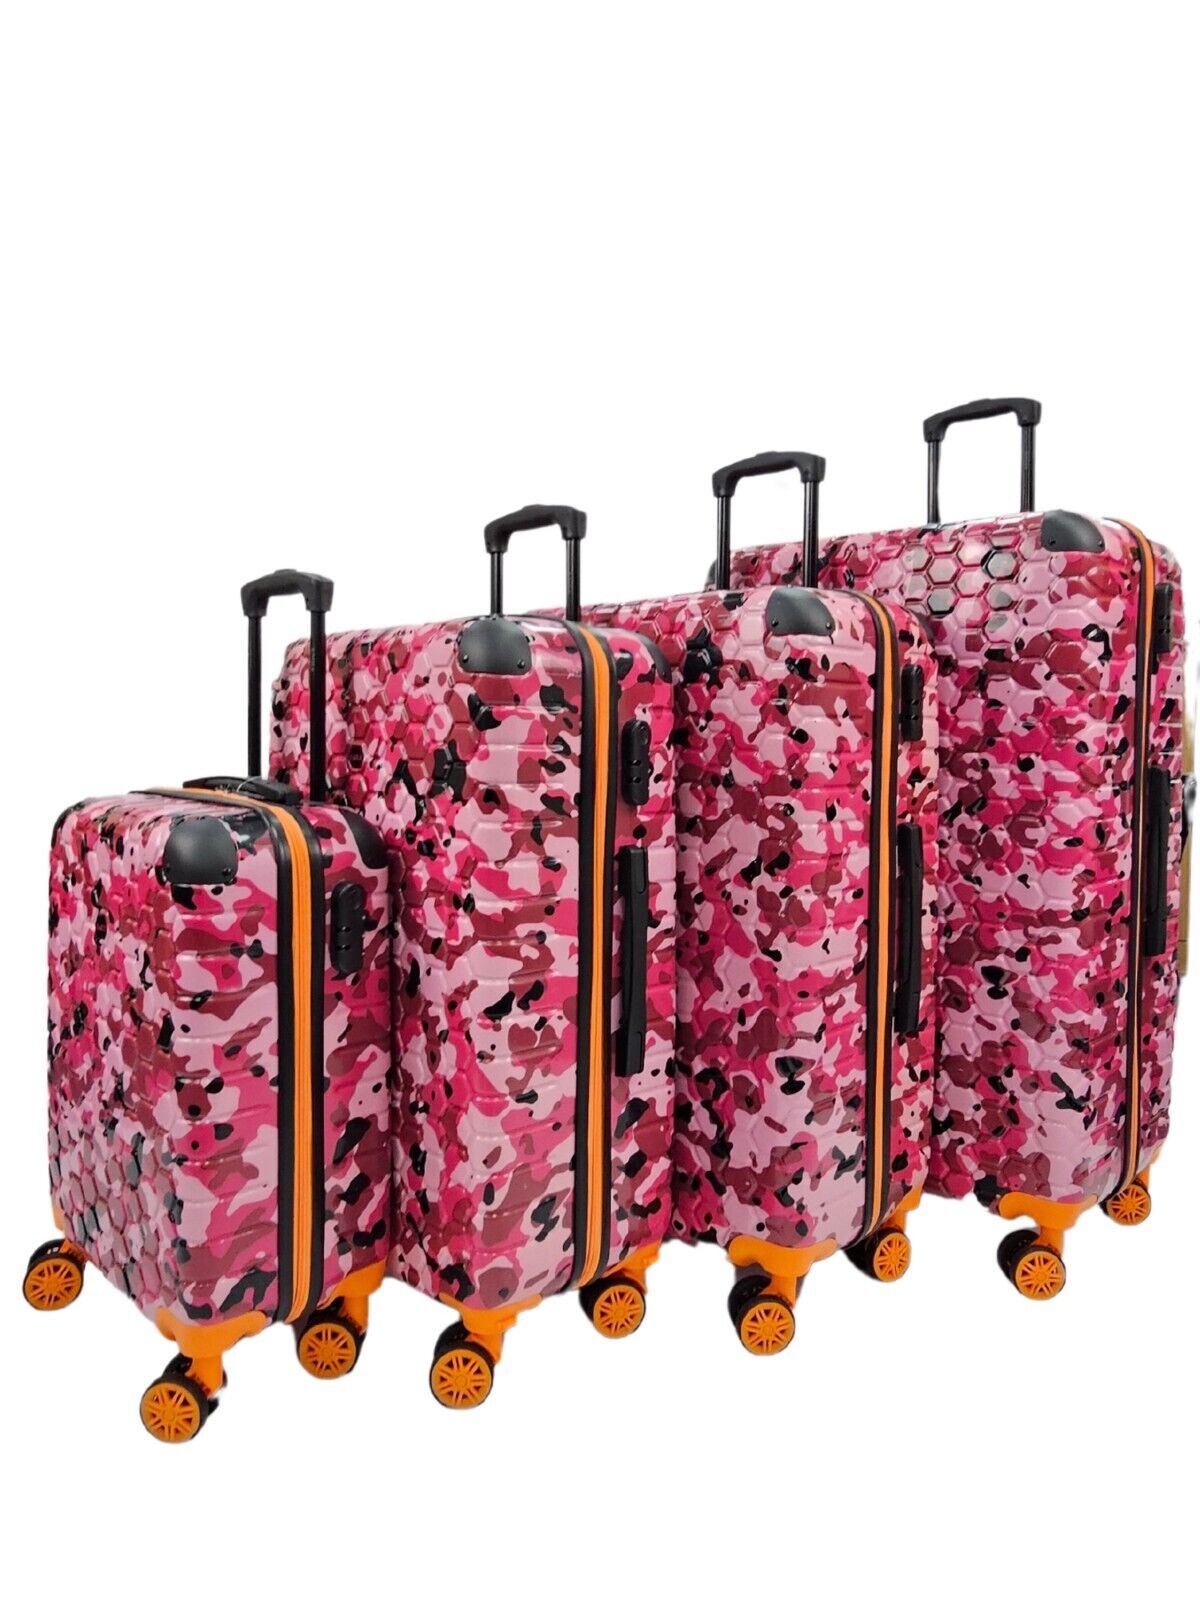 Brantley Set of 4 Hard Shell Suitcase in Pink